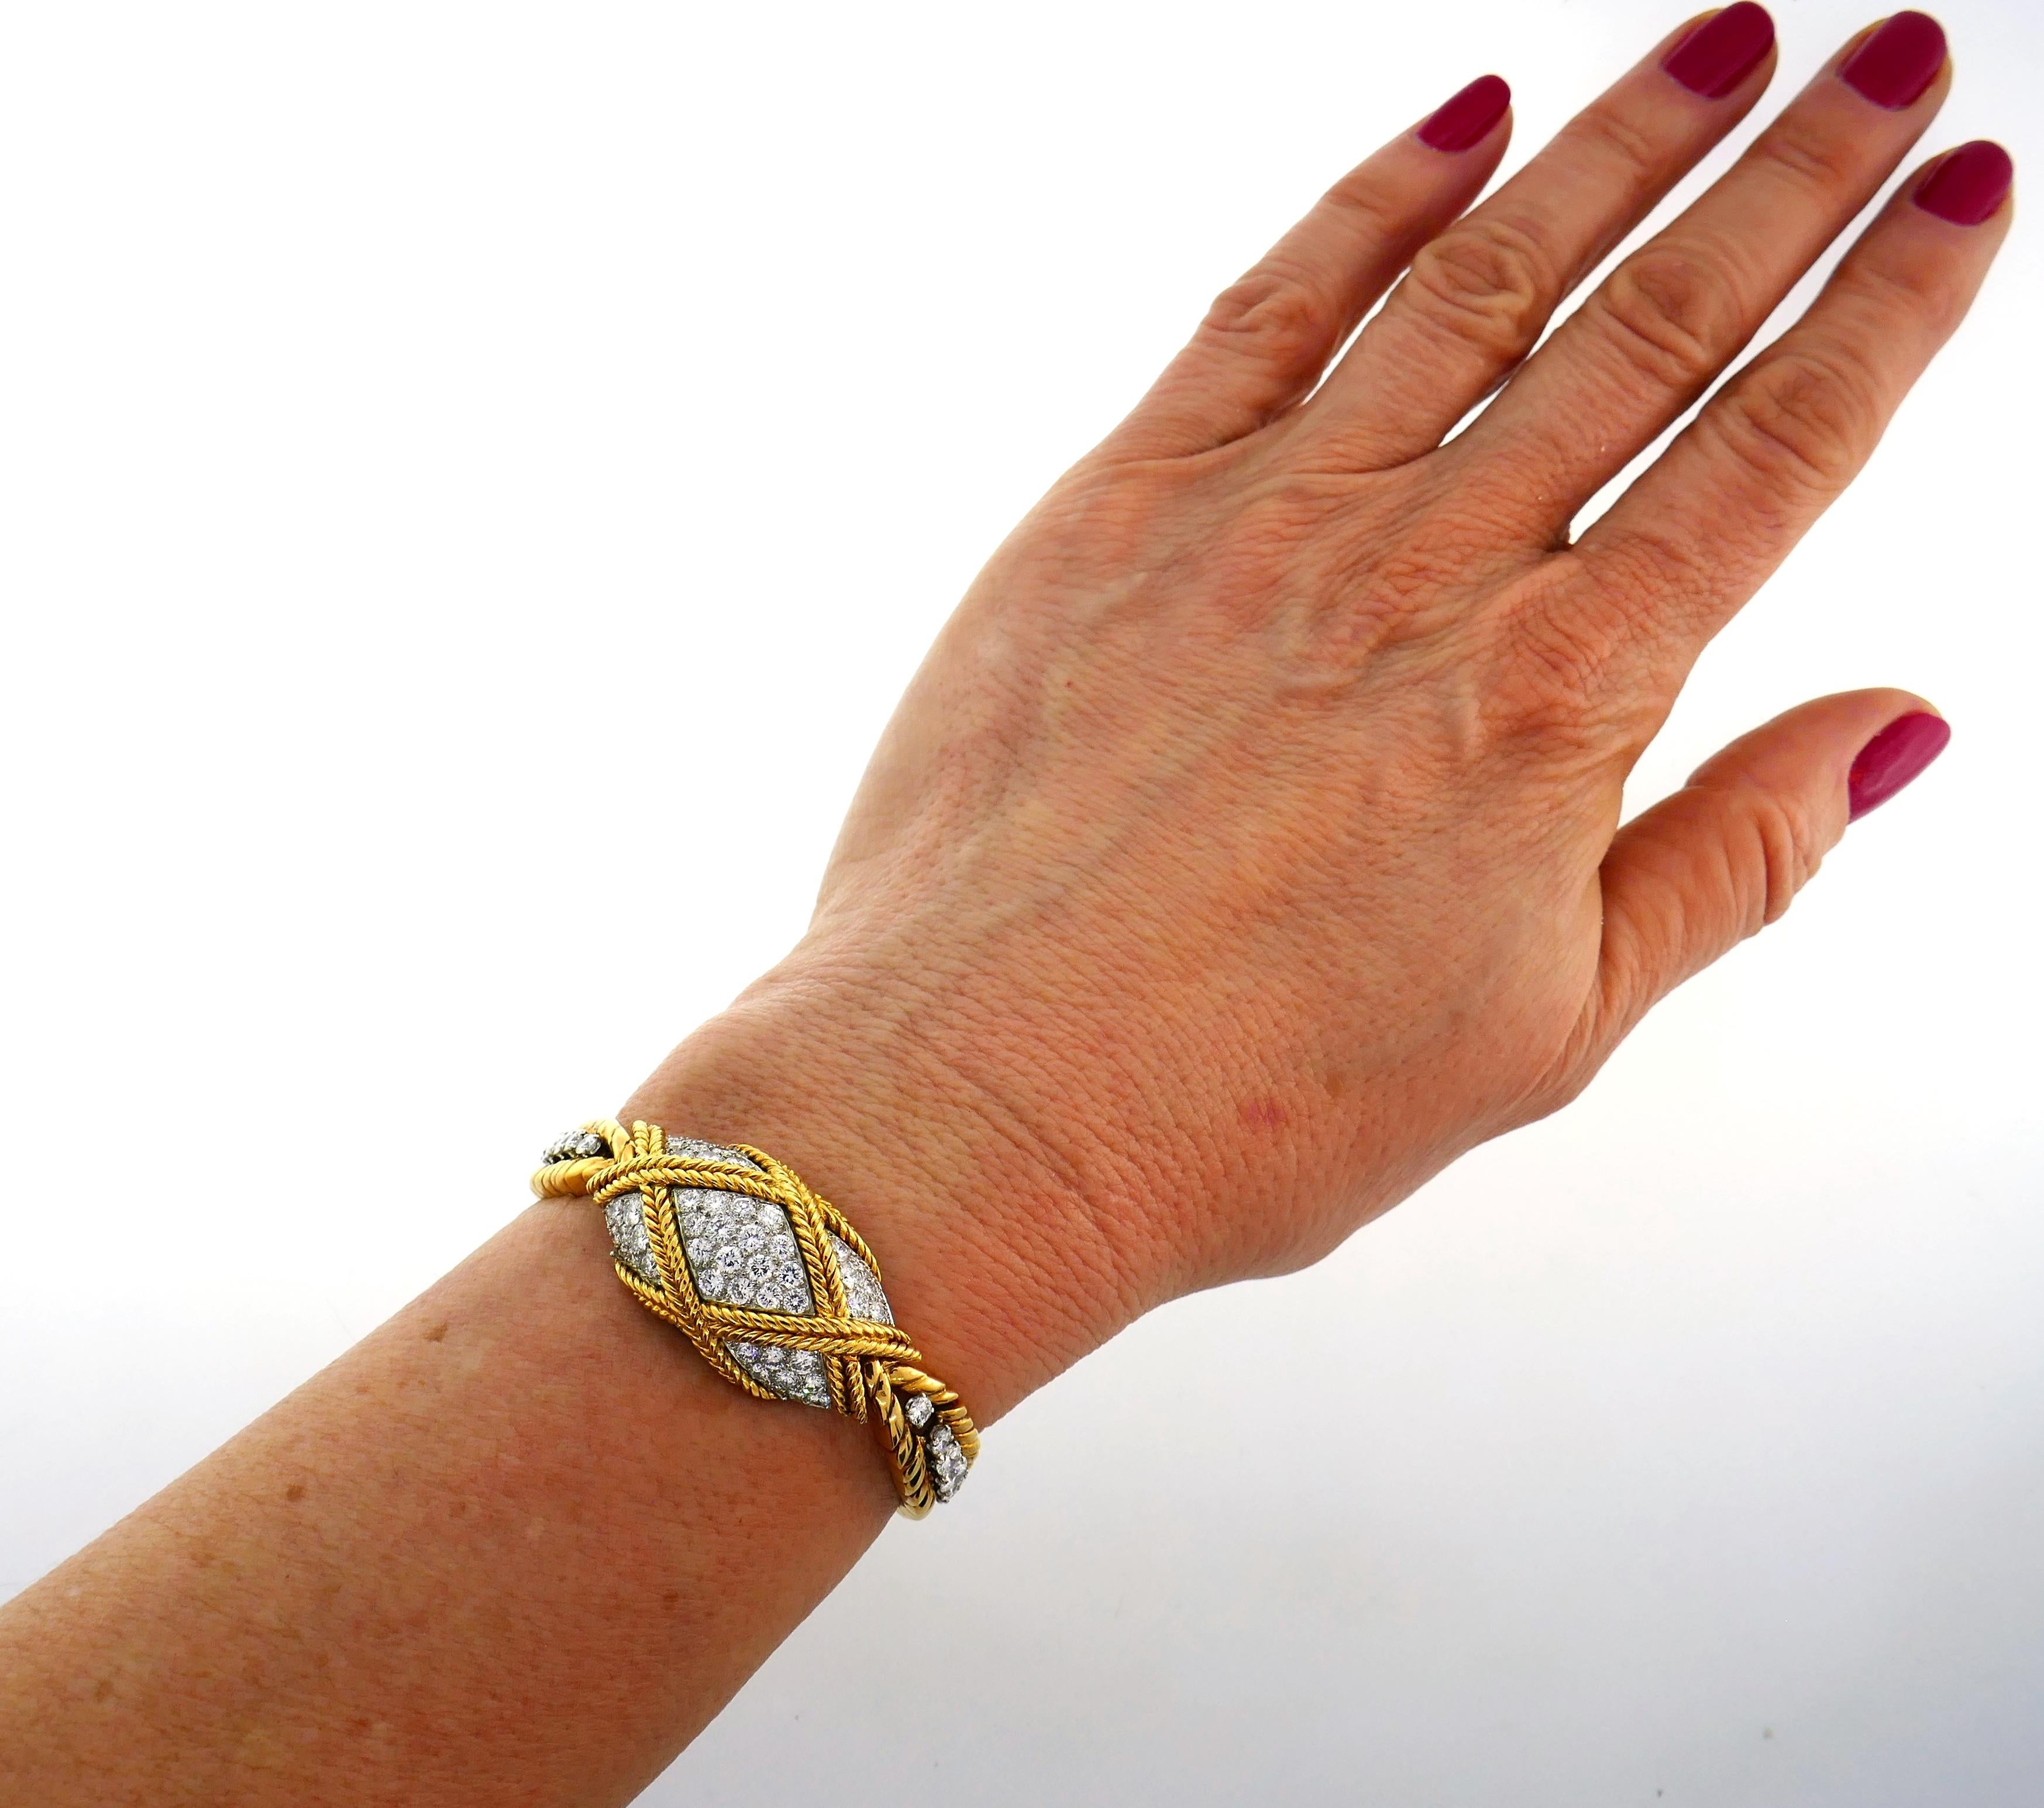 Feminine and elegant lady's watch/bracelet created by Van Cleef & Arpels in the 1950's. 
The watch is made of 18 karat (tested) yellow gold and encrusted with round brilliant cut diamonds (F-G color, VS1 clarity, total weight approximately 2.82